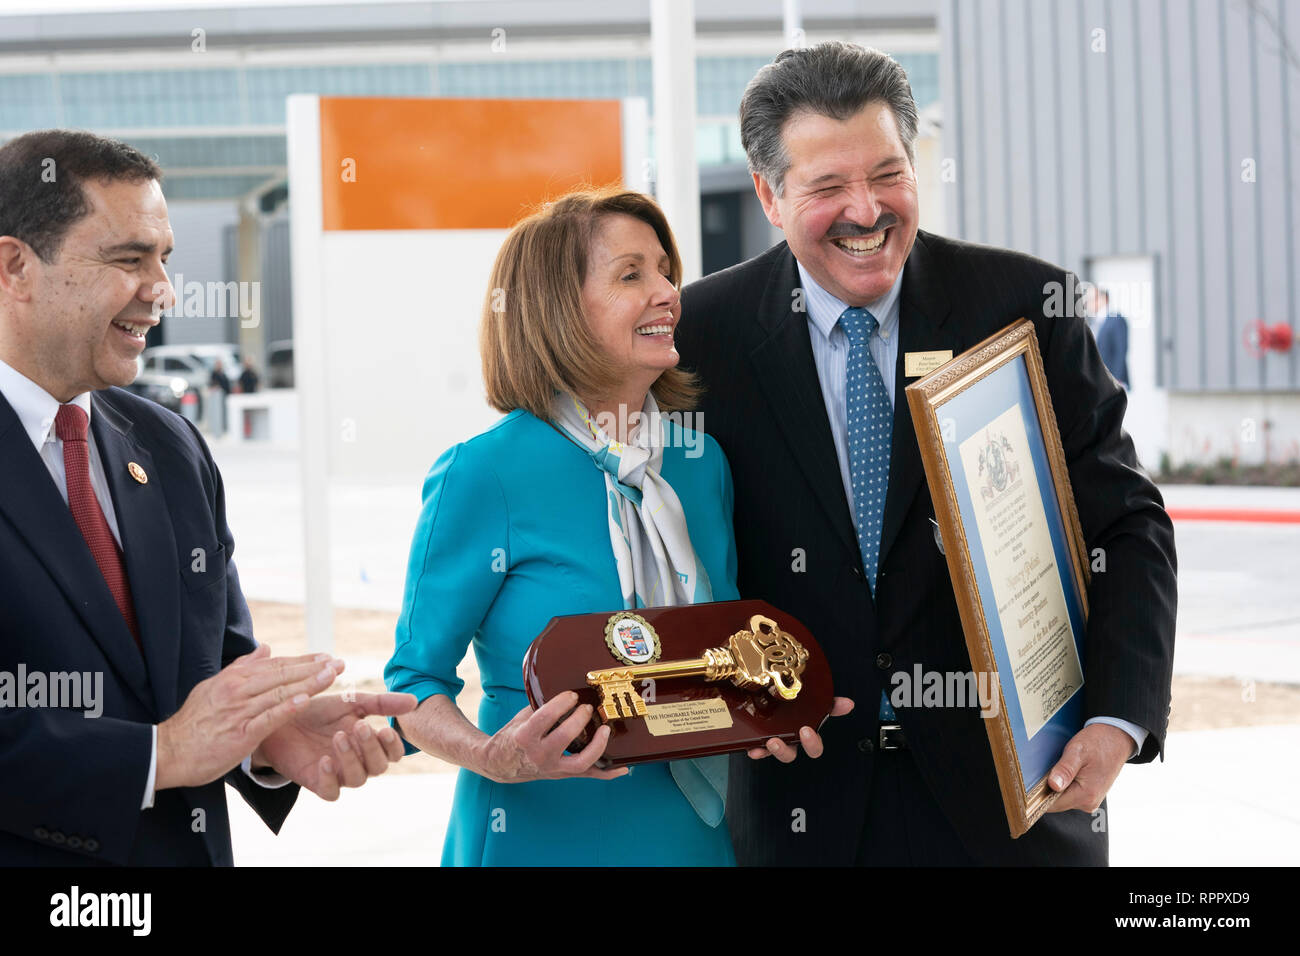 United States House of Representatives Speaker Nancy Pelosi (D-CA), receives a key to the city from Laredo Mayor Pete Saenz, right, as Laredo Congressman Henry Cuellar applauds during a press conference at the border between Laredo and Nuevo Laredo, Tamaulipas, Mexico. Stock Photo